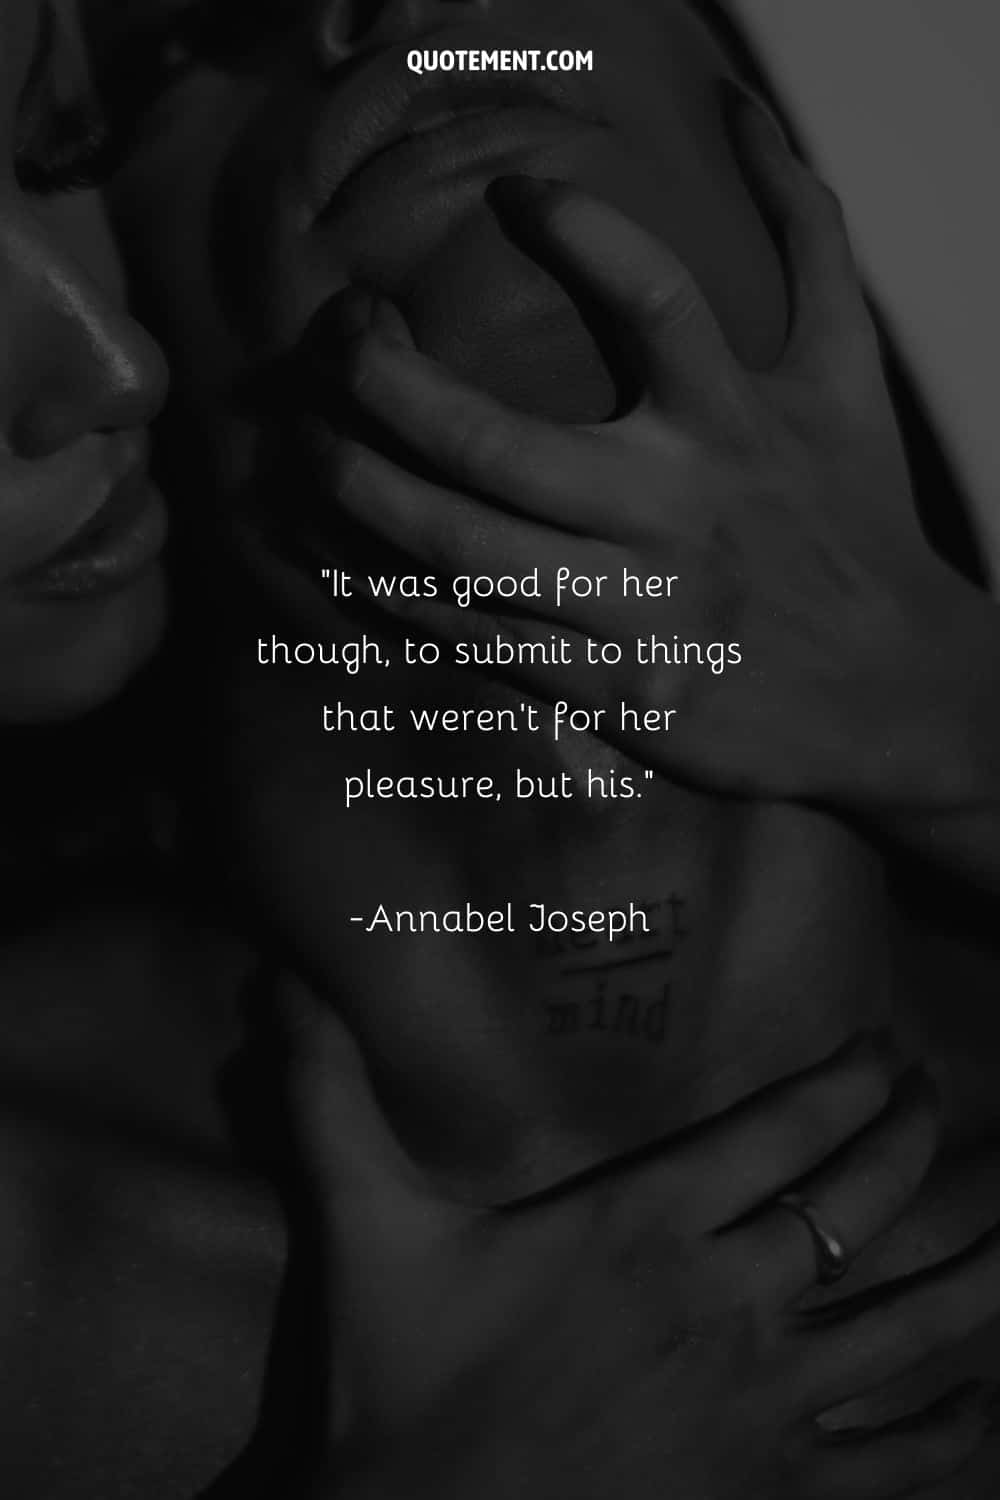 portrayal of two people in an intimate encounter representing a submissive woman quote